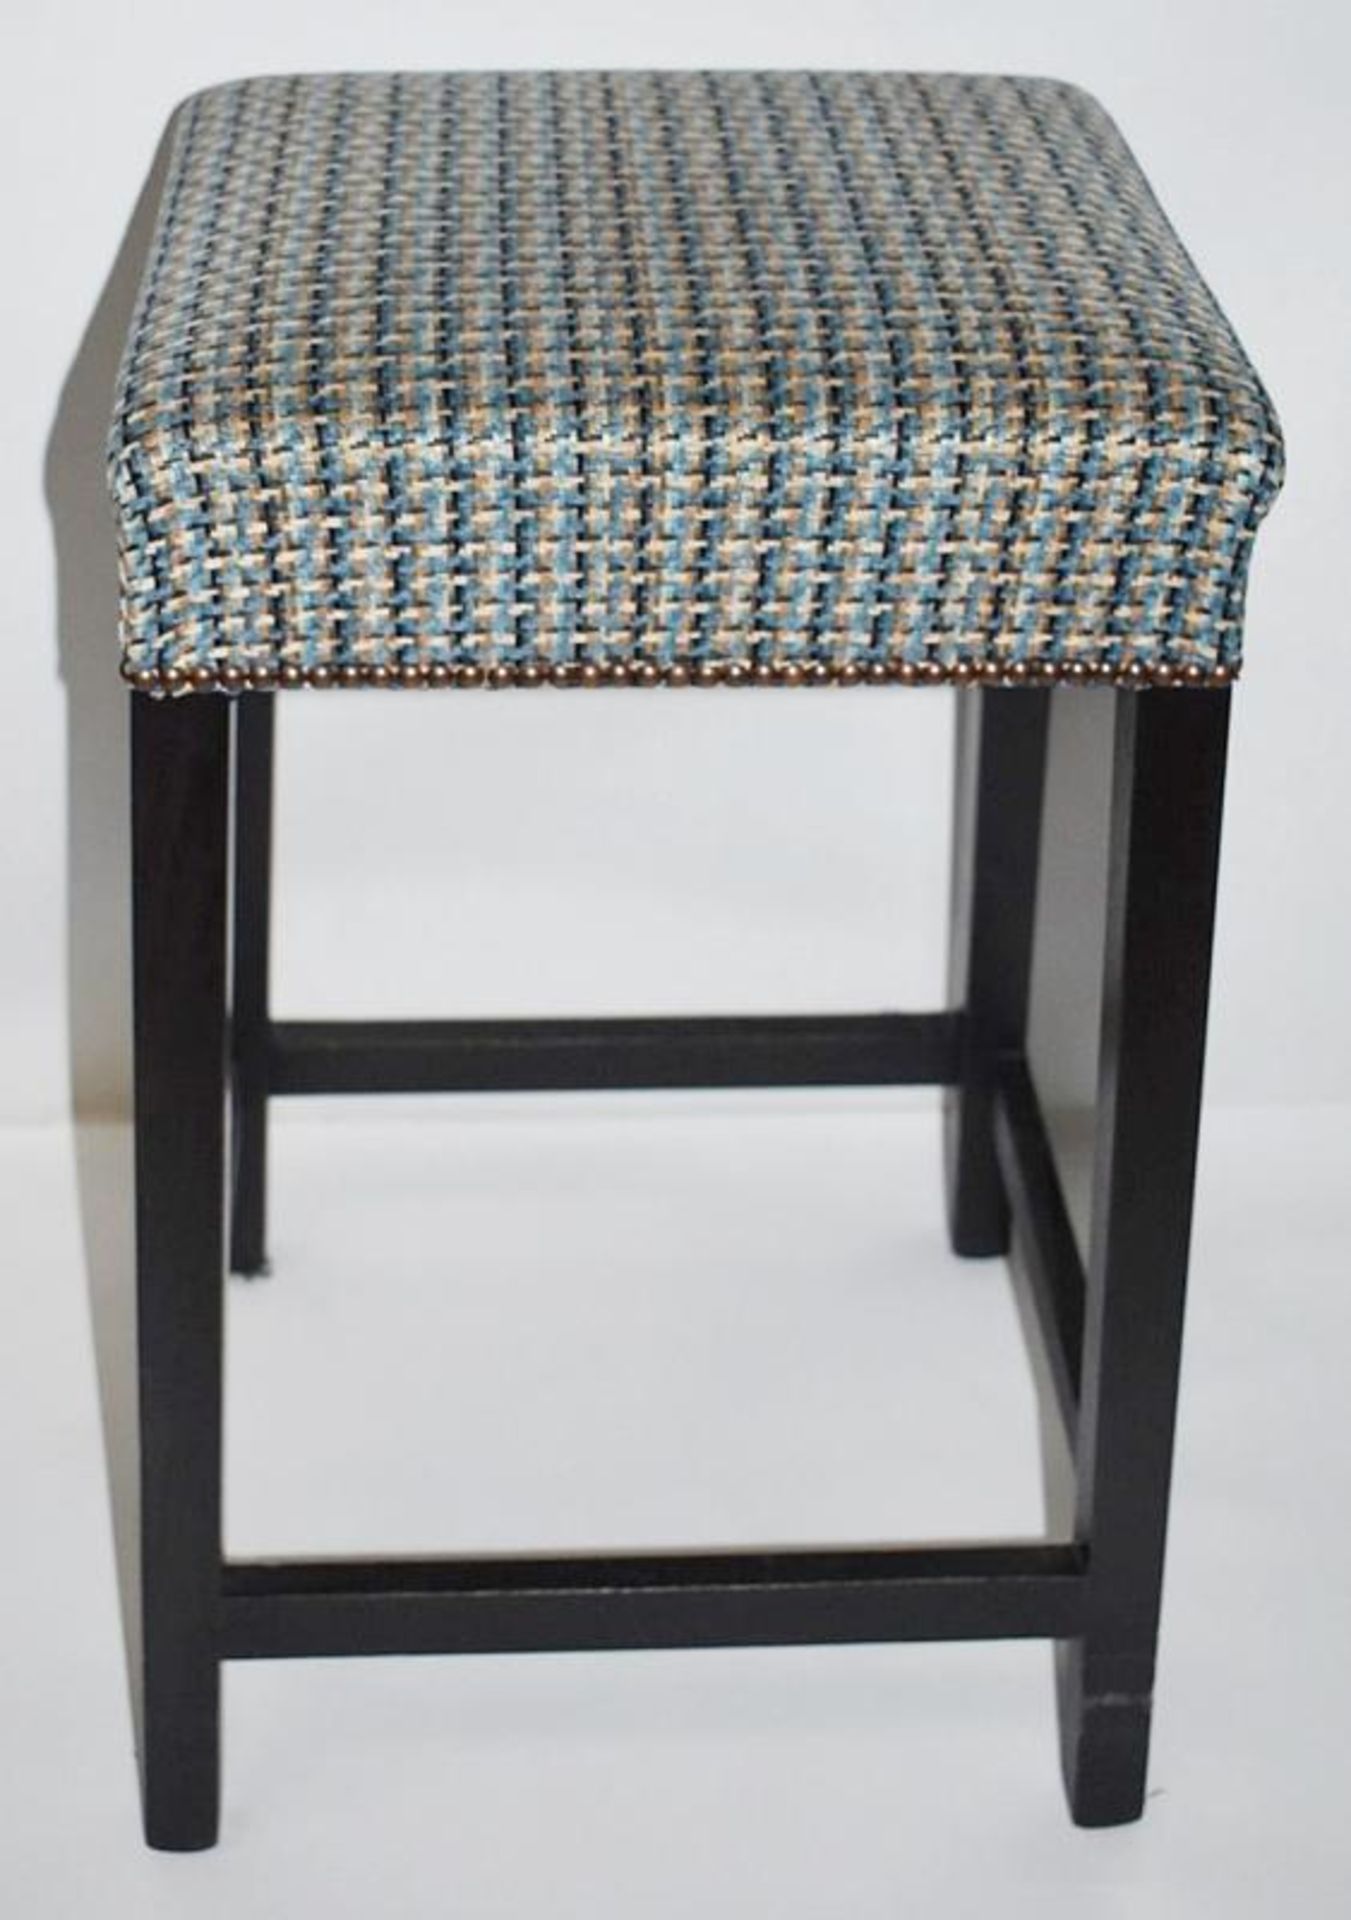 1 x Contemporary Bar Stool Upholstered In A Chic Designer Fabric - Recently Removed From A Famous De - Bild 6 aus 7